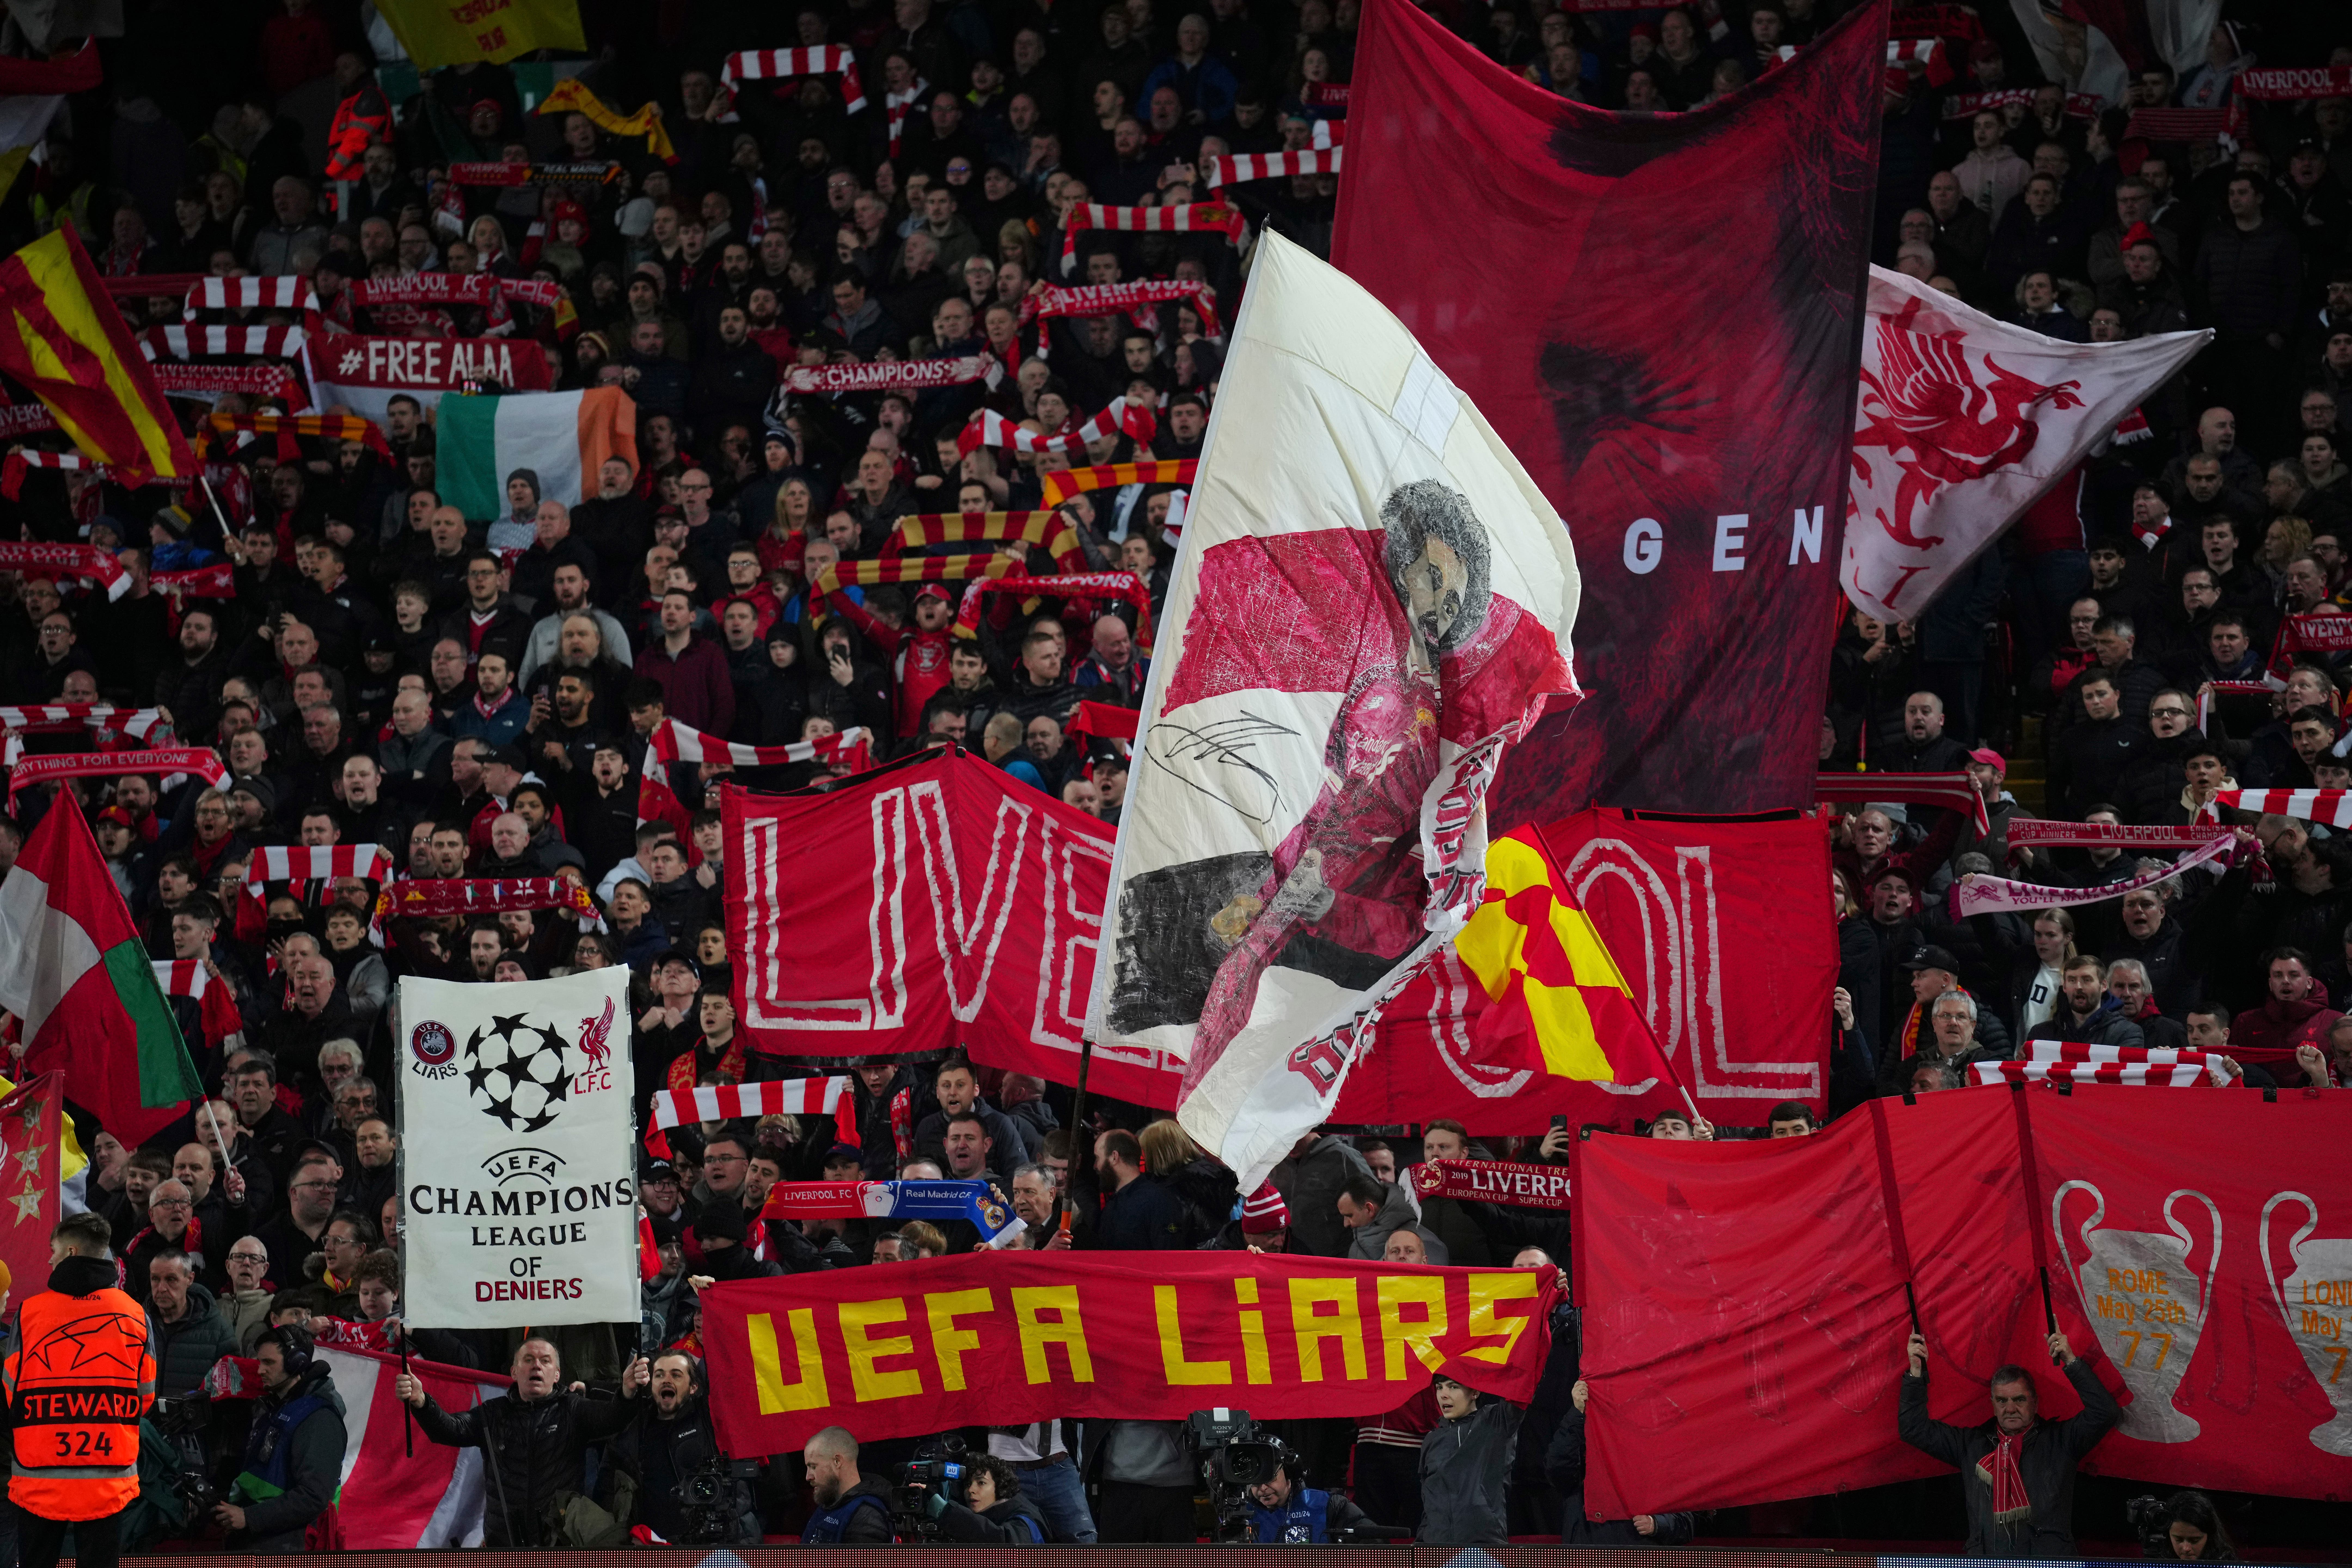 Liverpool fans protested against Uefa ahead of their Champions League clash against Real Madrid